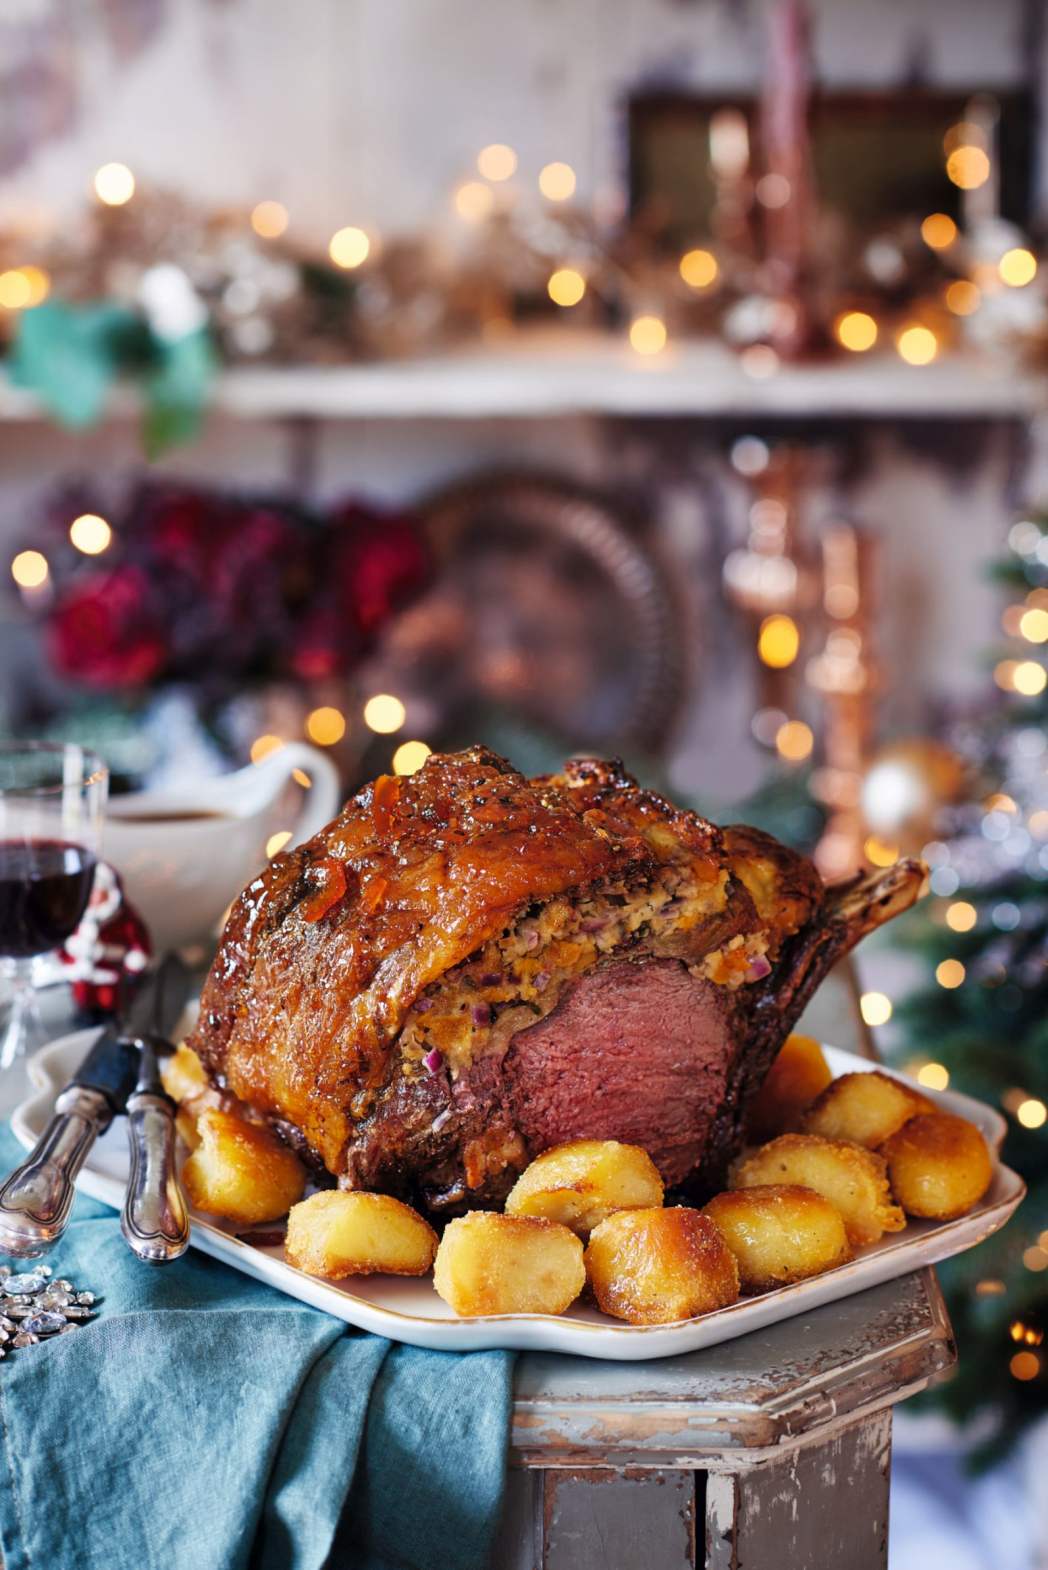 Image for blog - 15 mouth-watering Christmas Day mains